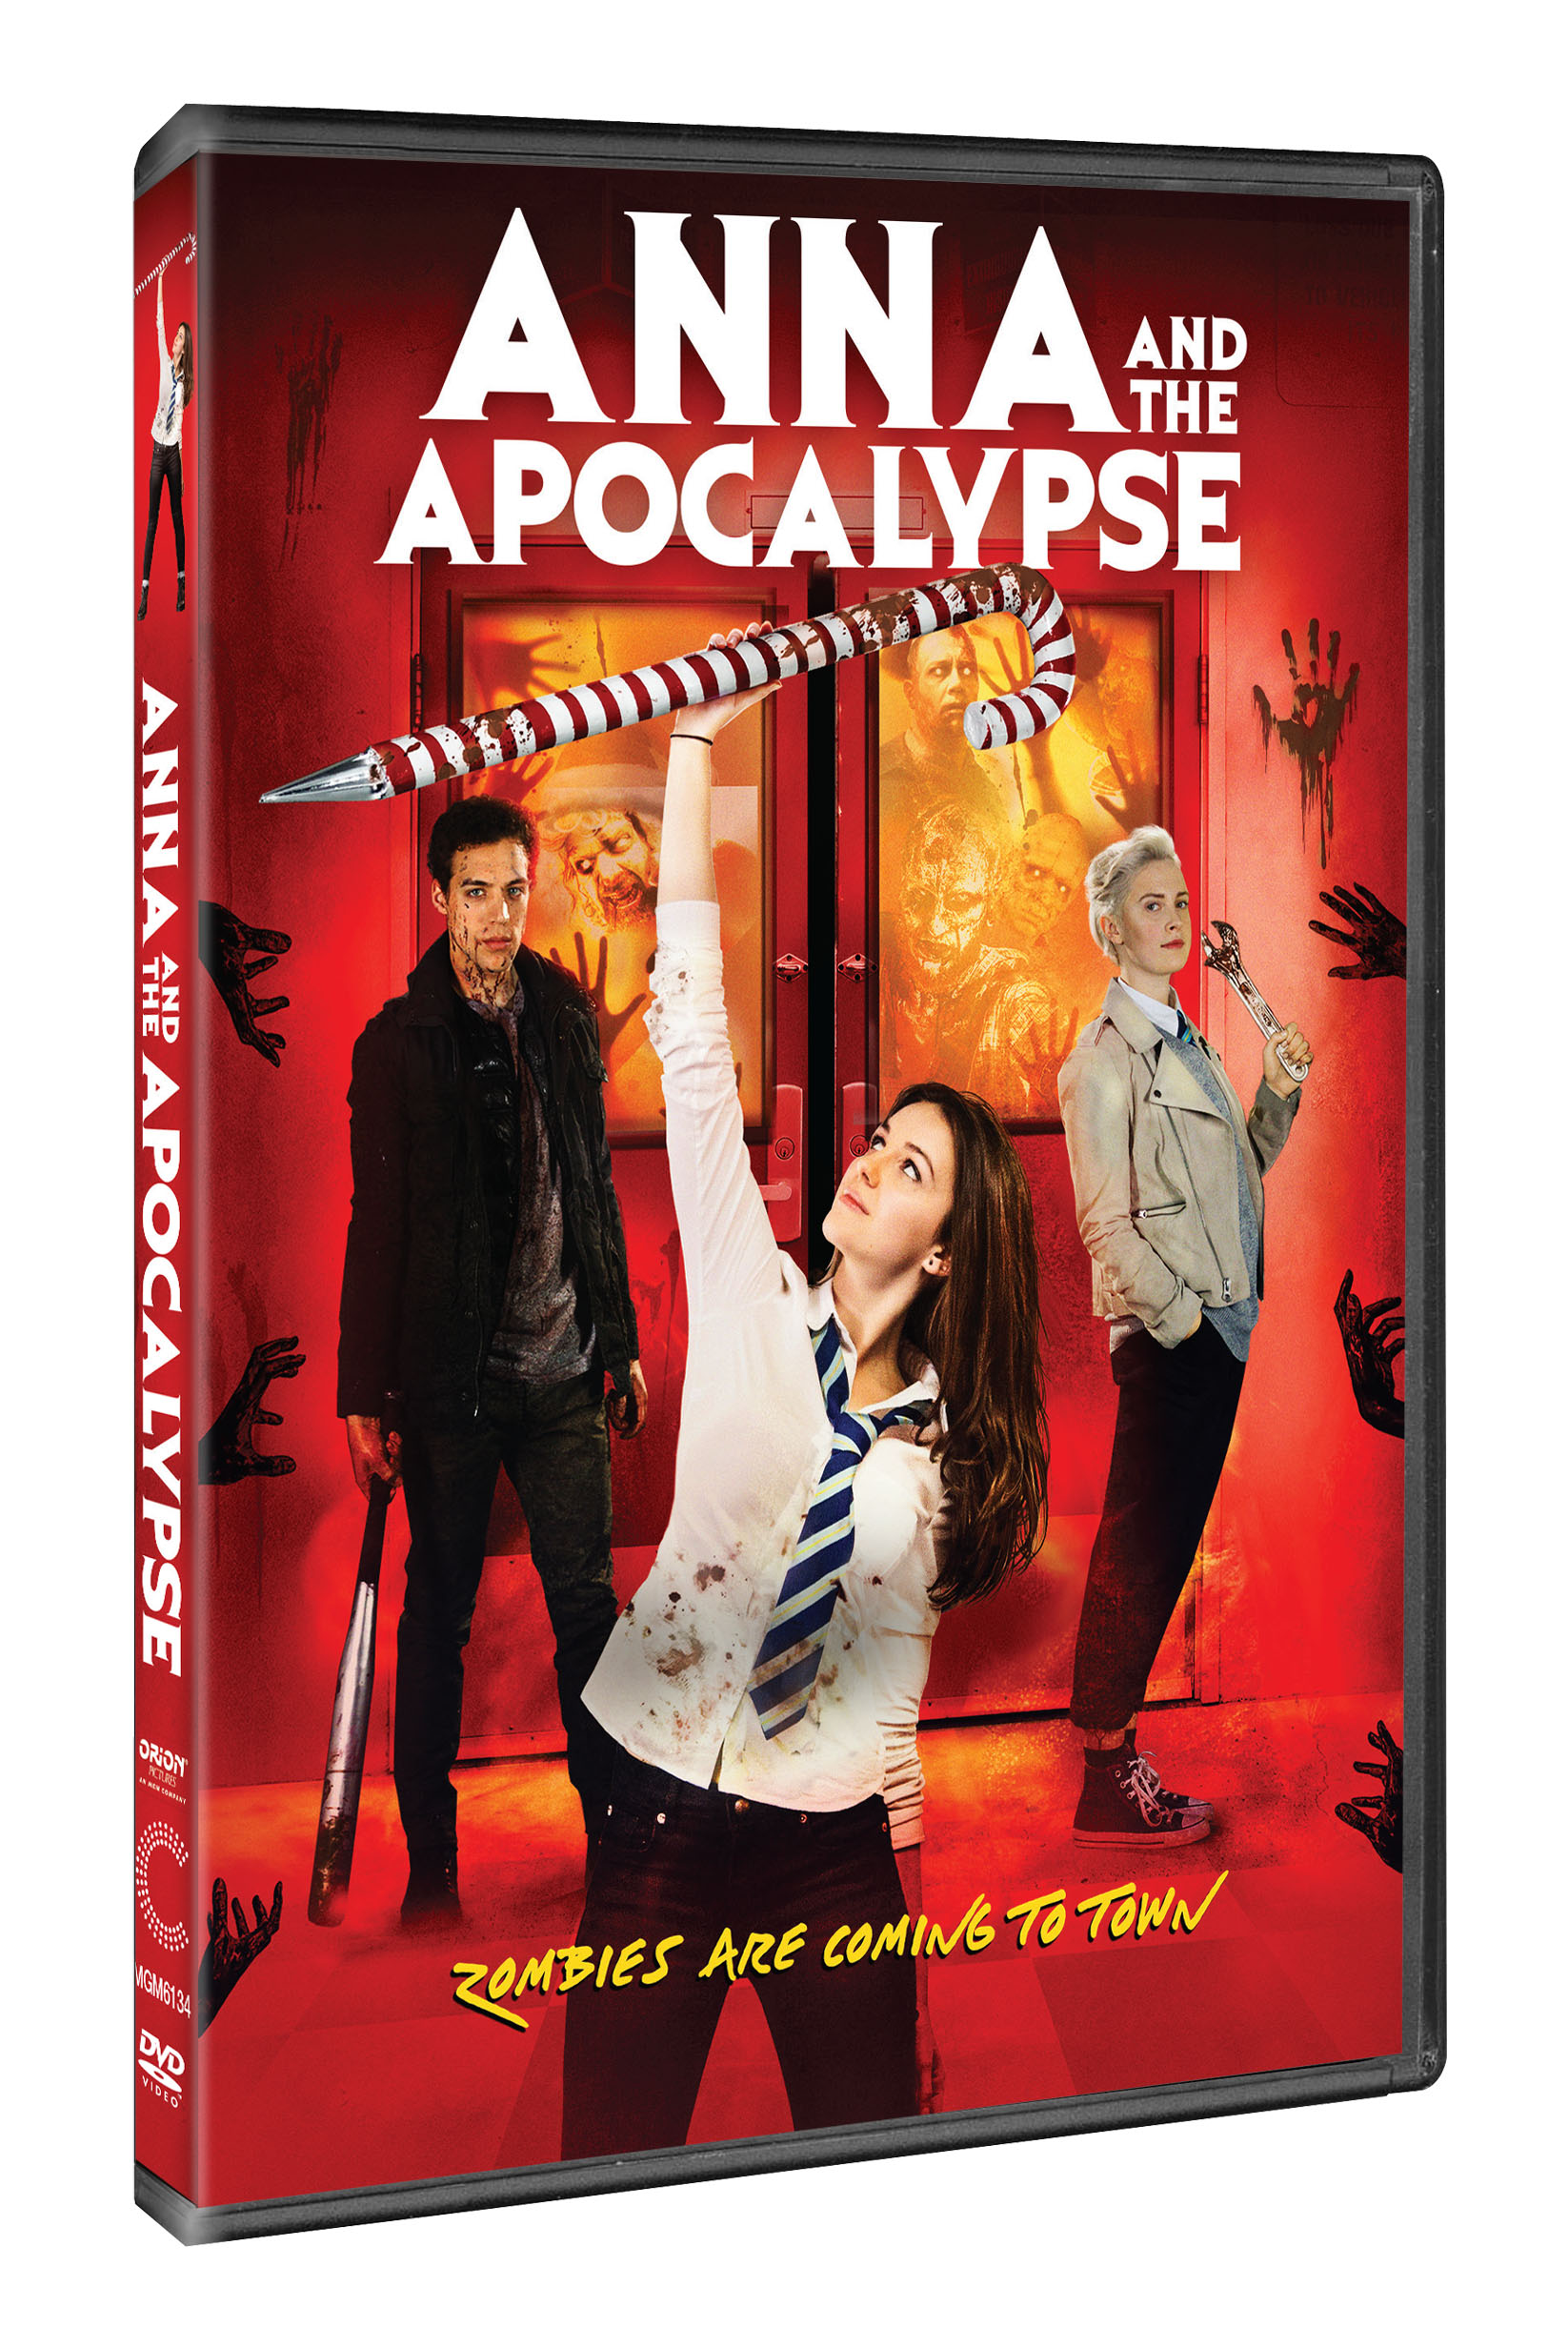 Anna and the Apocalypse DVD release